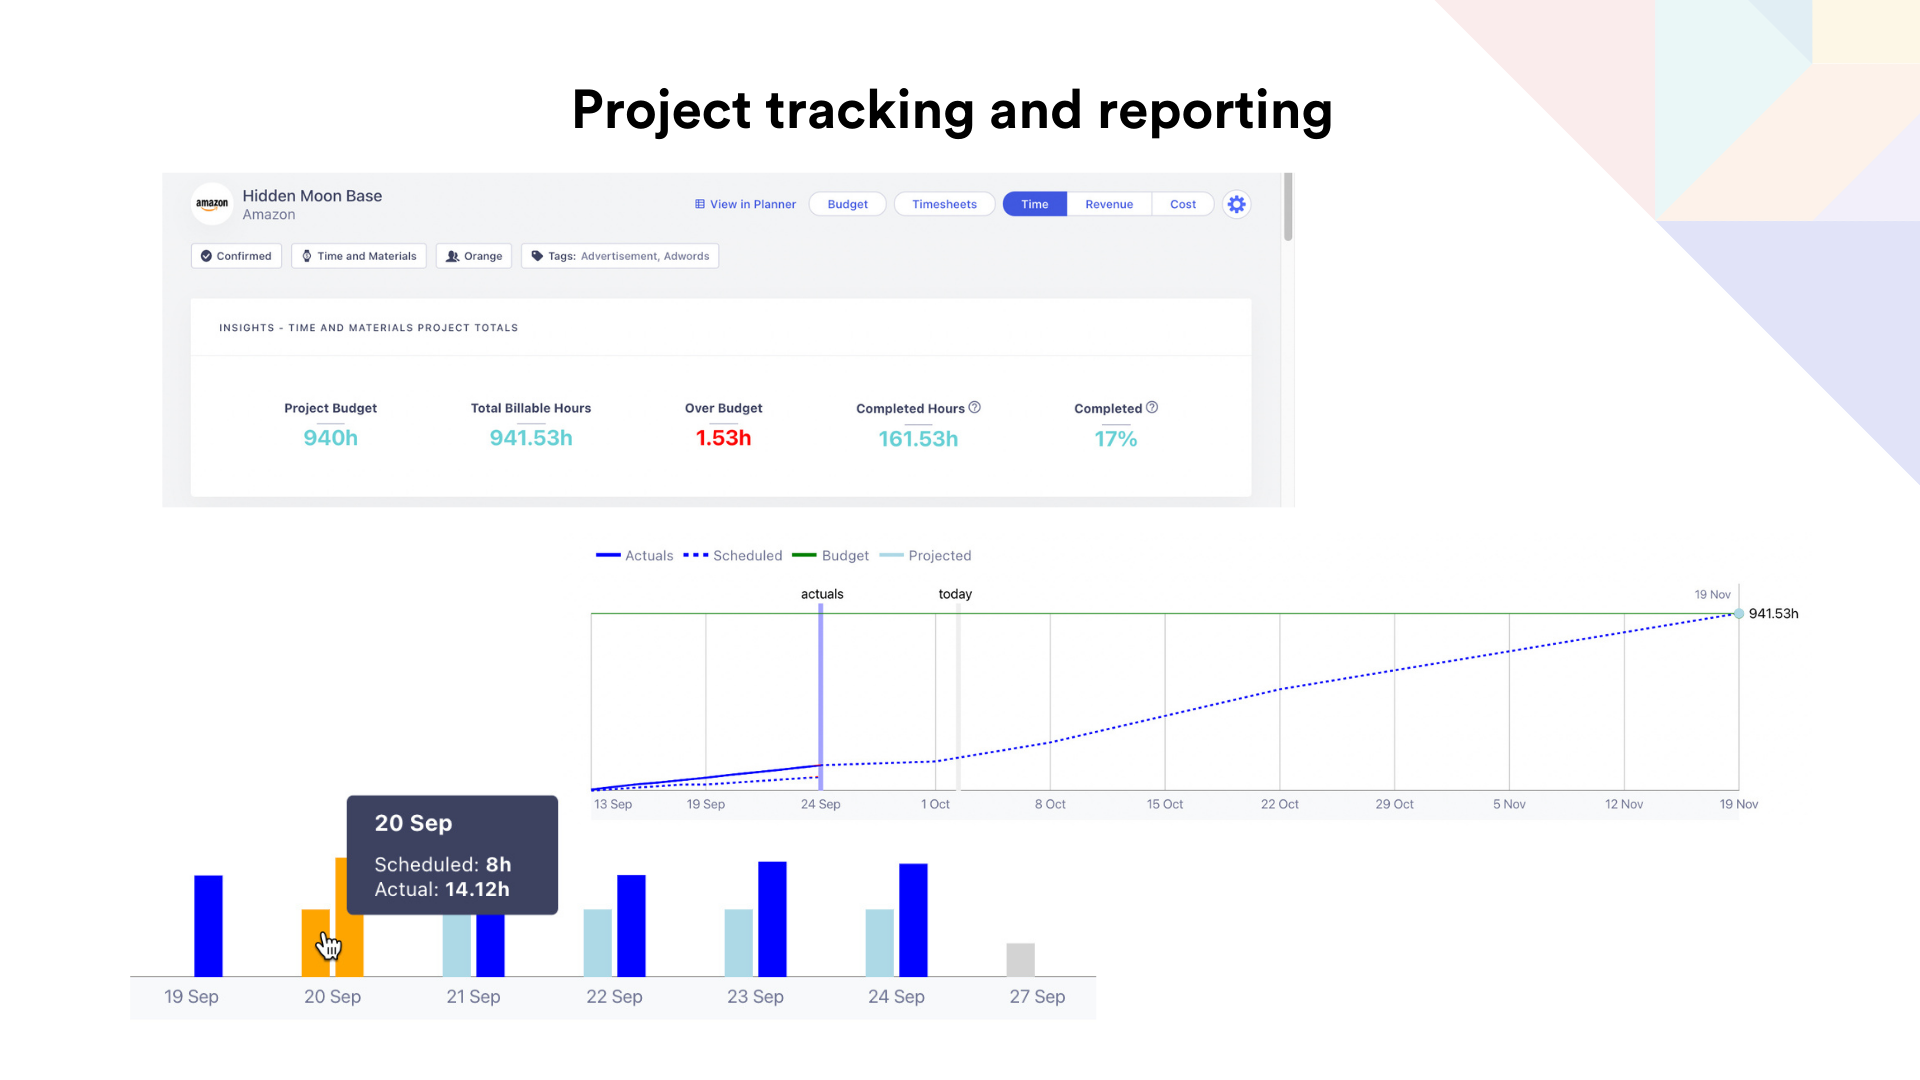 Compare actual hours with scheduled hours, and see whether your project is under or over-budget.